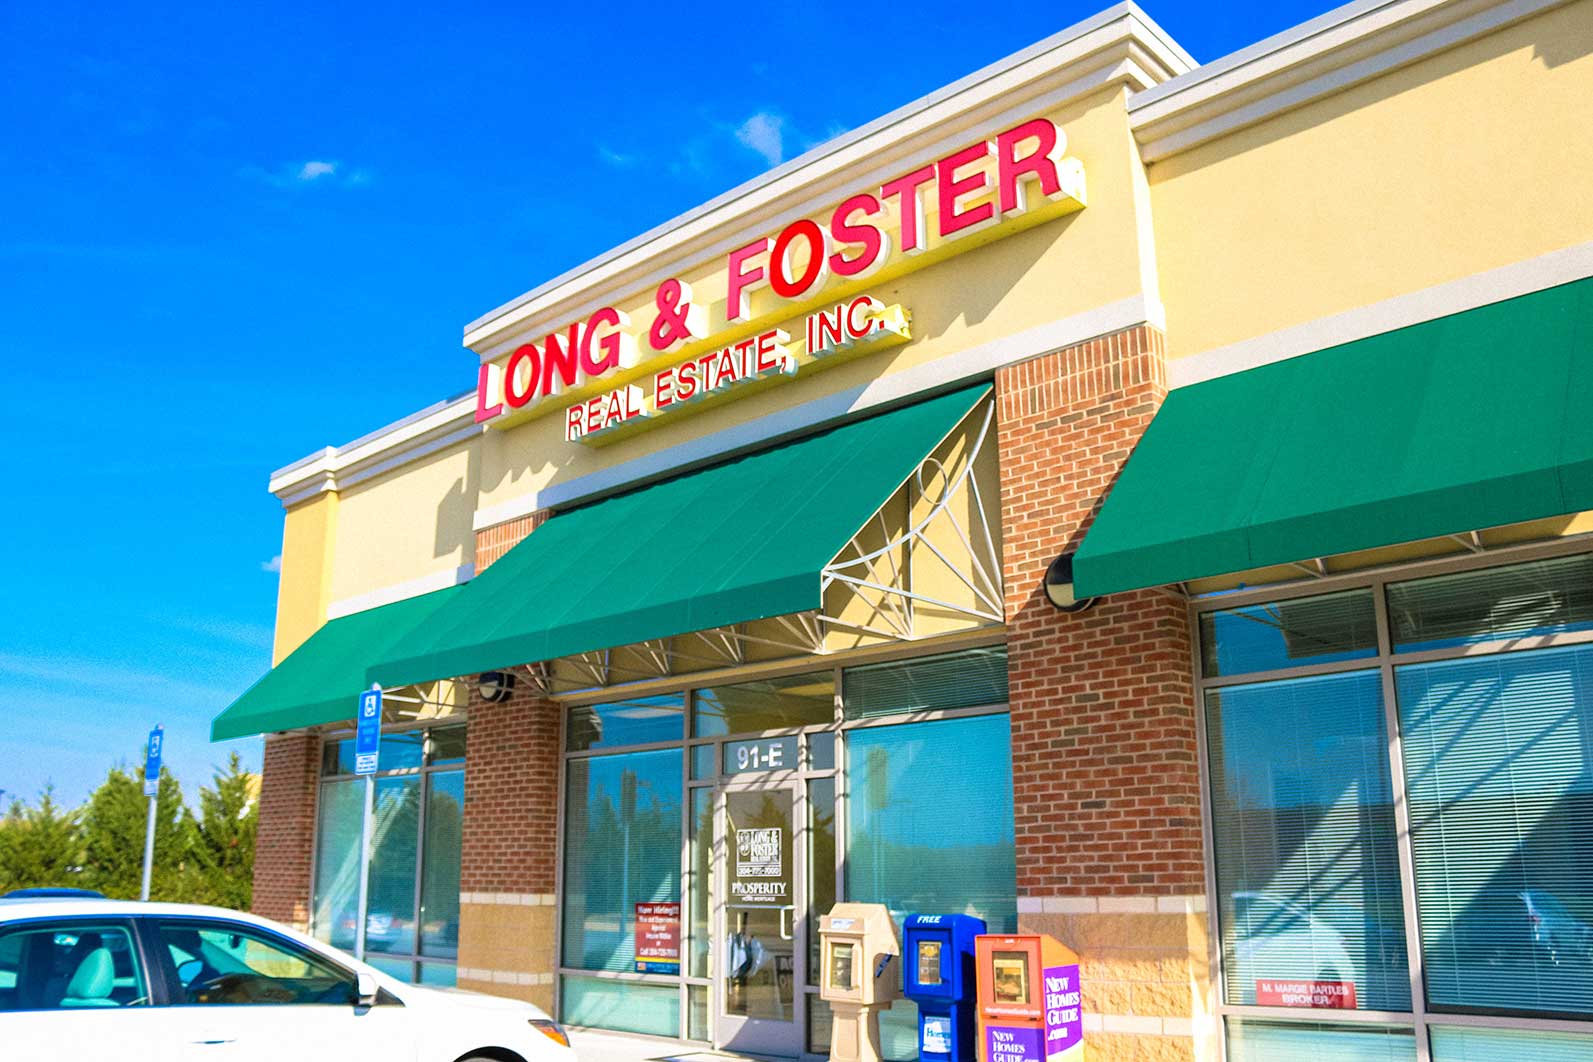 Long & Foster in Charles Town, WV